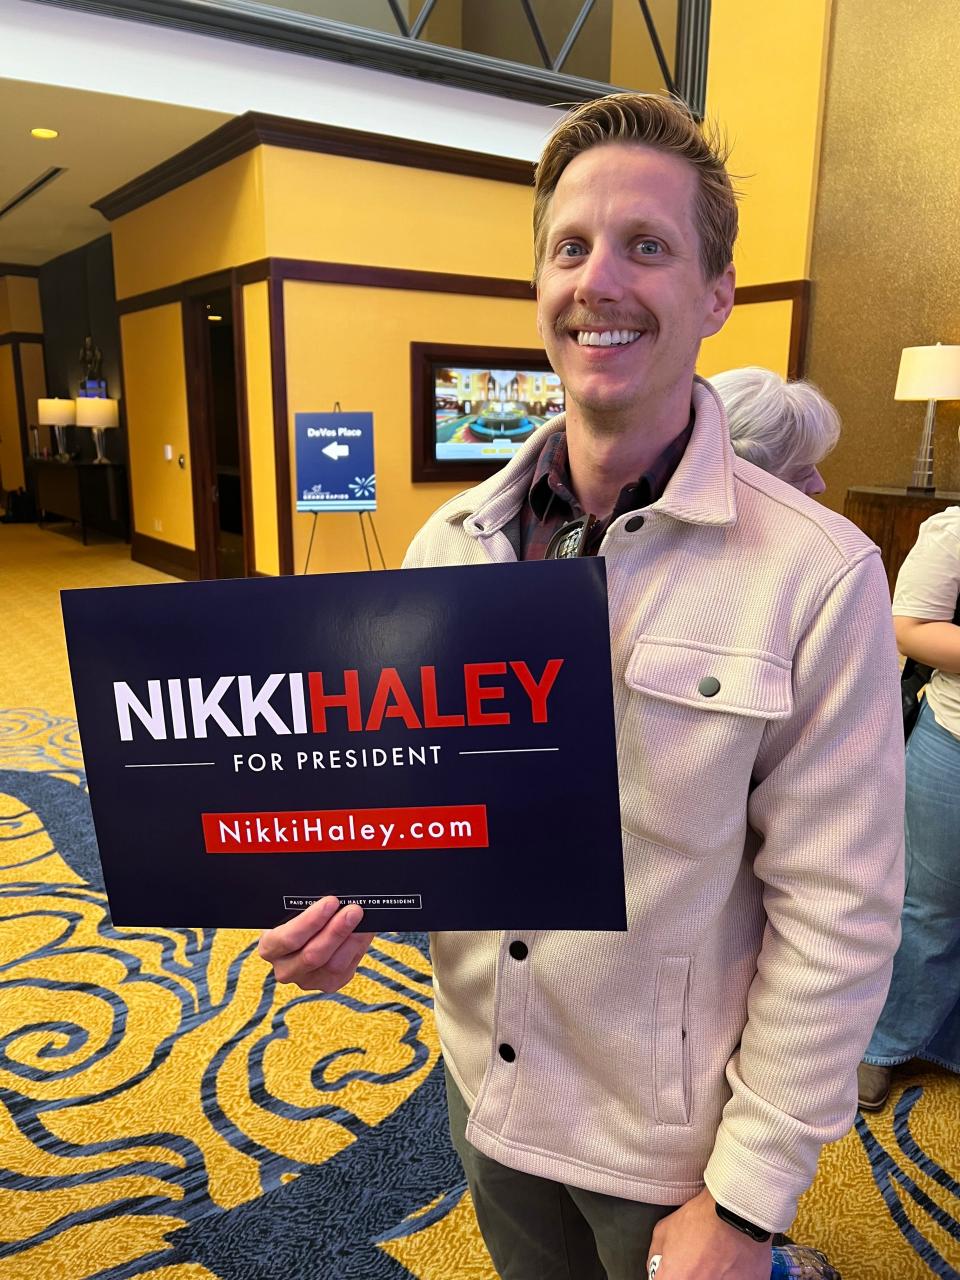 Scott Muellerleile, 37, poses with a sign supporting Nikki Haley for president before her event at the Amway Grand Plaza on Monday, Feb. 26, 2024, in Grand Rapids, Mich. Muellerleile, of Grand Haven, said he supports Haley because she represents a more "middle of the road" option than President Joe Biden and former President Donald Trump, and hopes she runs as a third-party candidate.